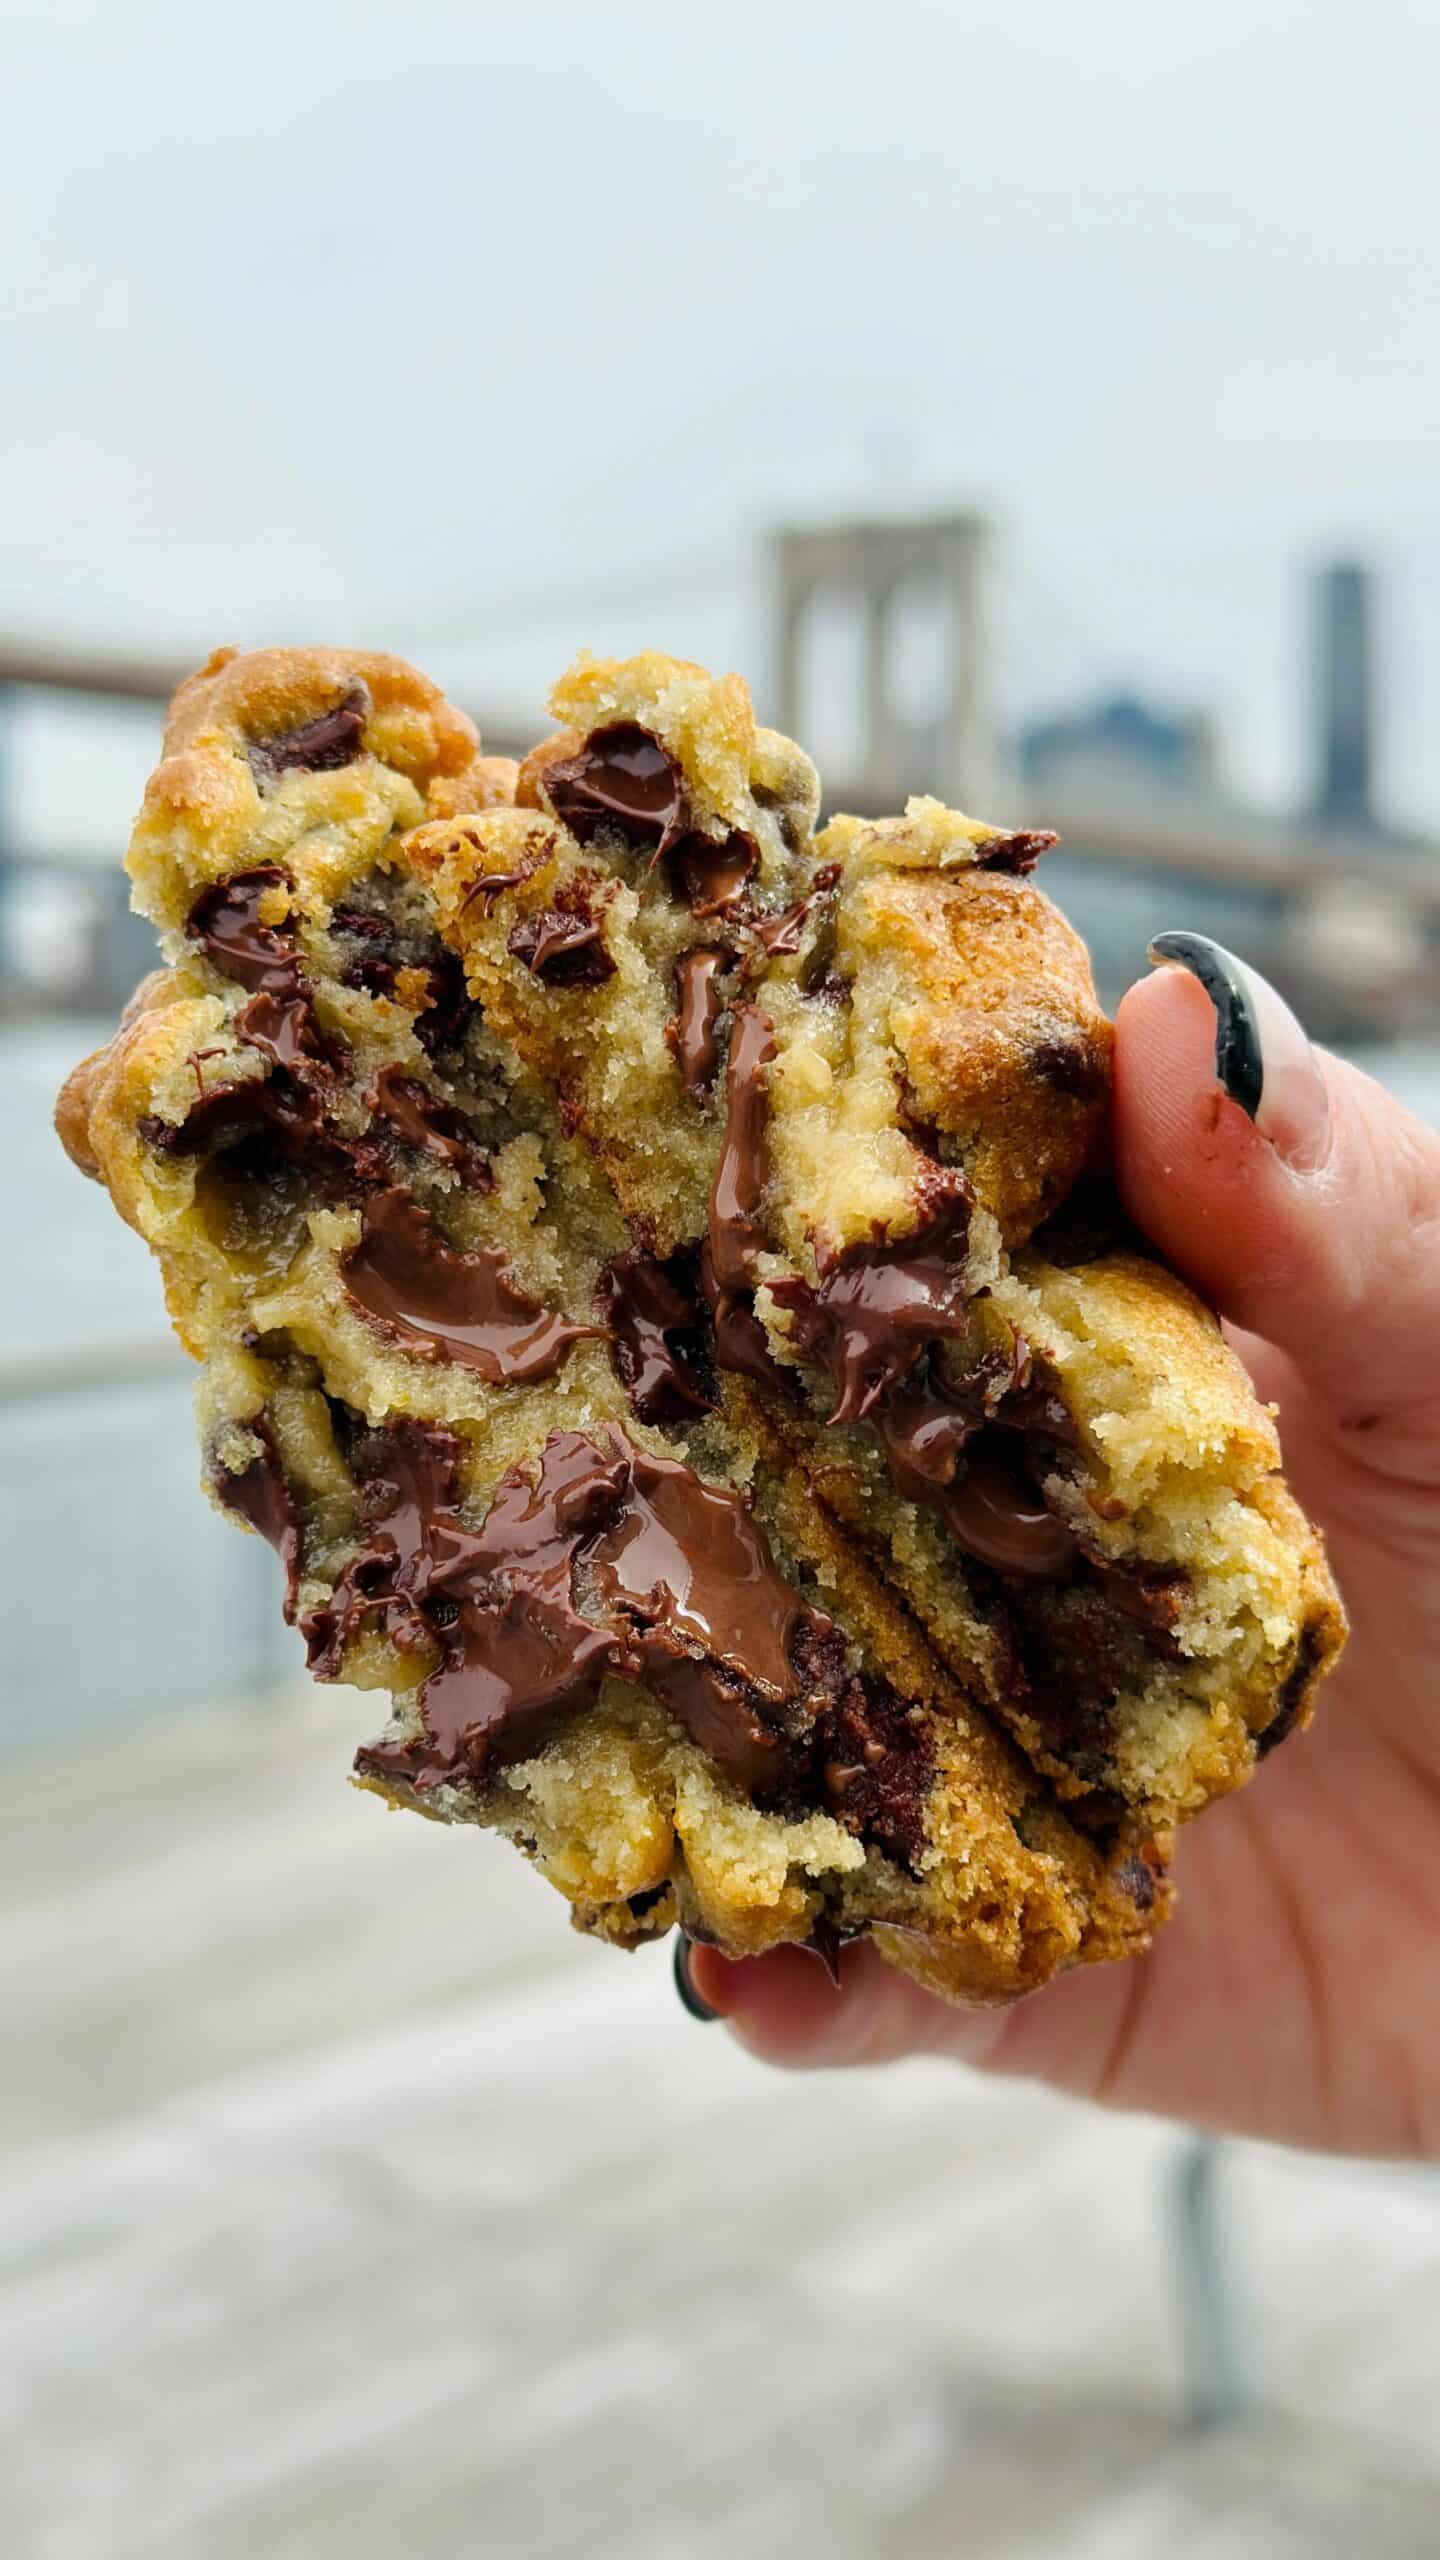 The perfect pov of @funnyfacebakery’s award winning chocolate chip cookie. #TheSeaport